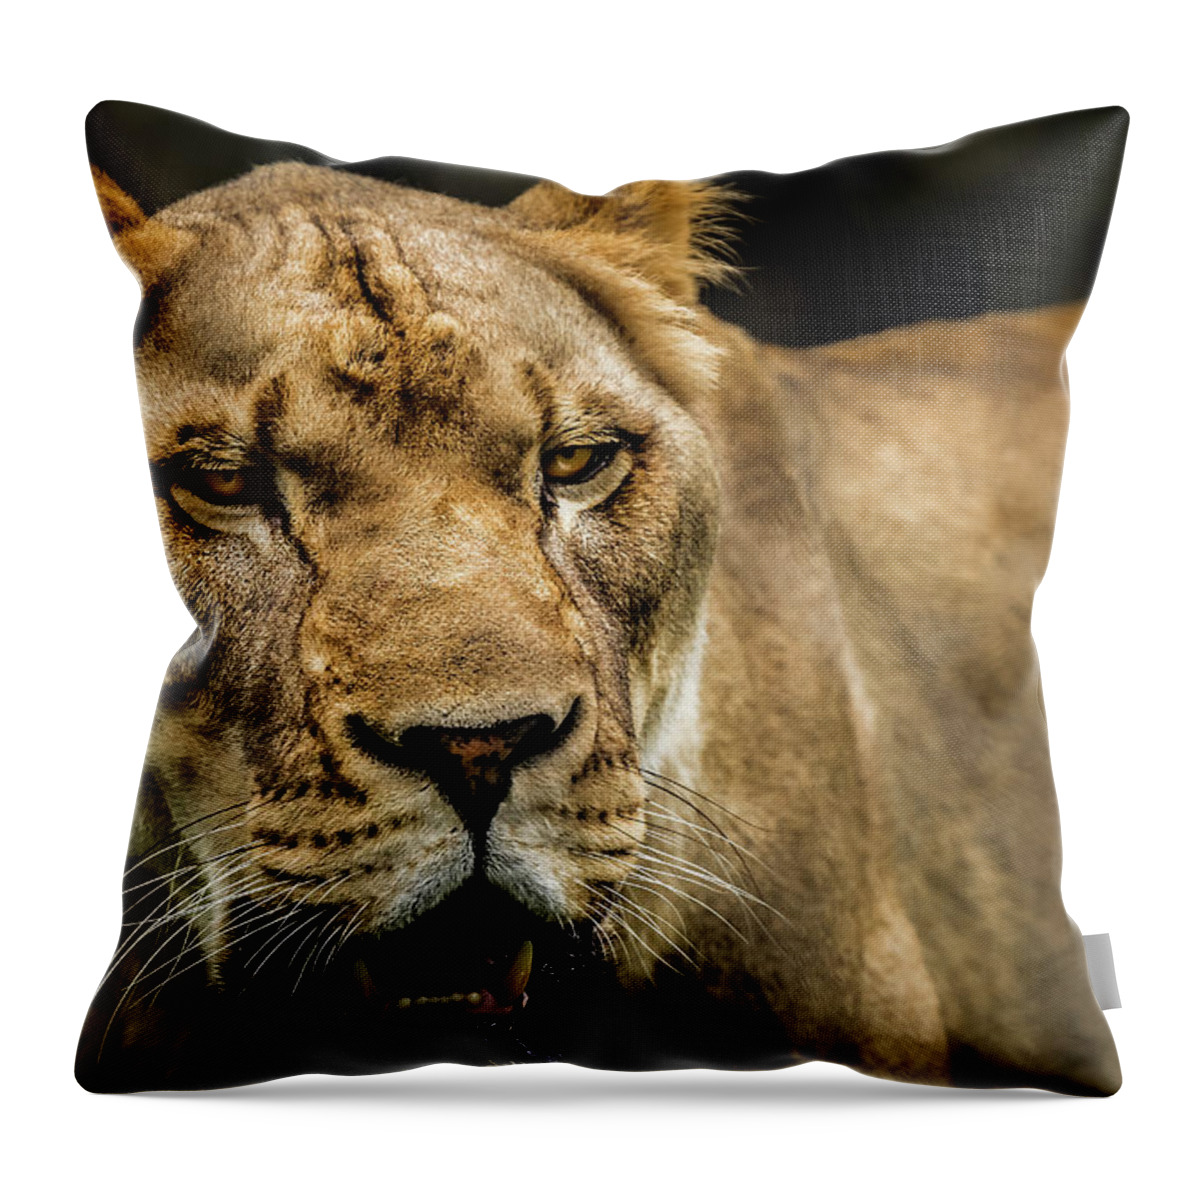 Panthera Throw Pillow featuring the photograph Lioness by Ron Pate